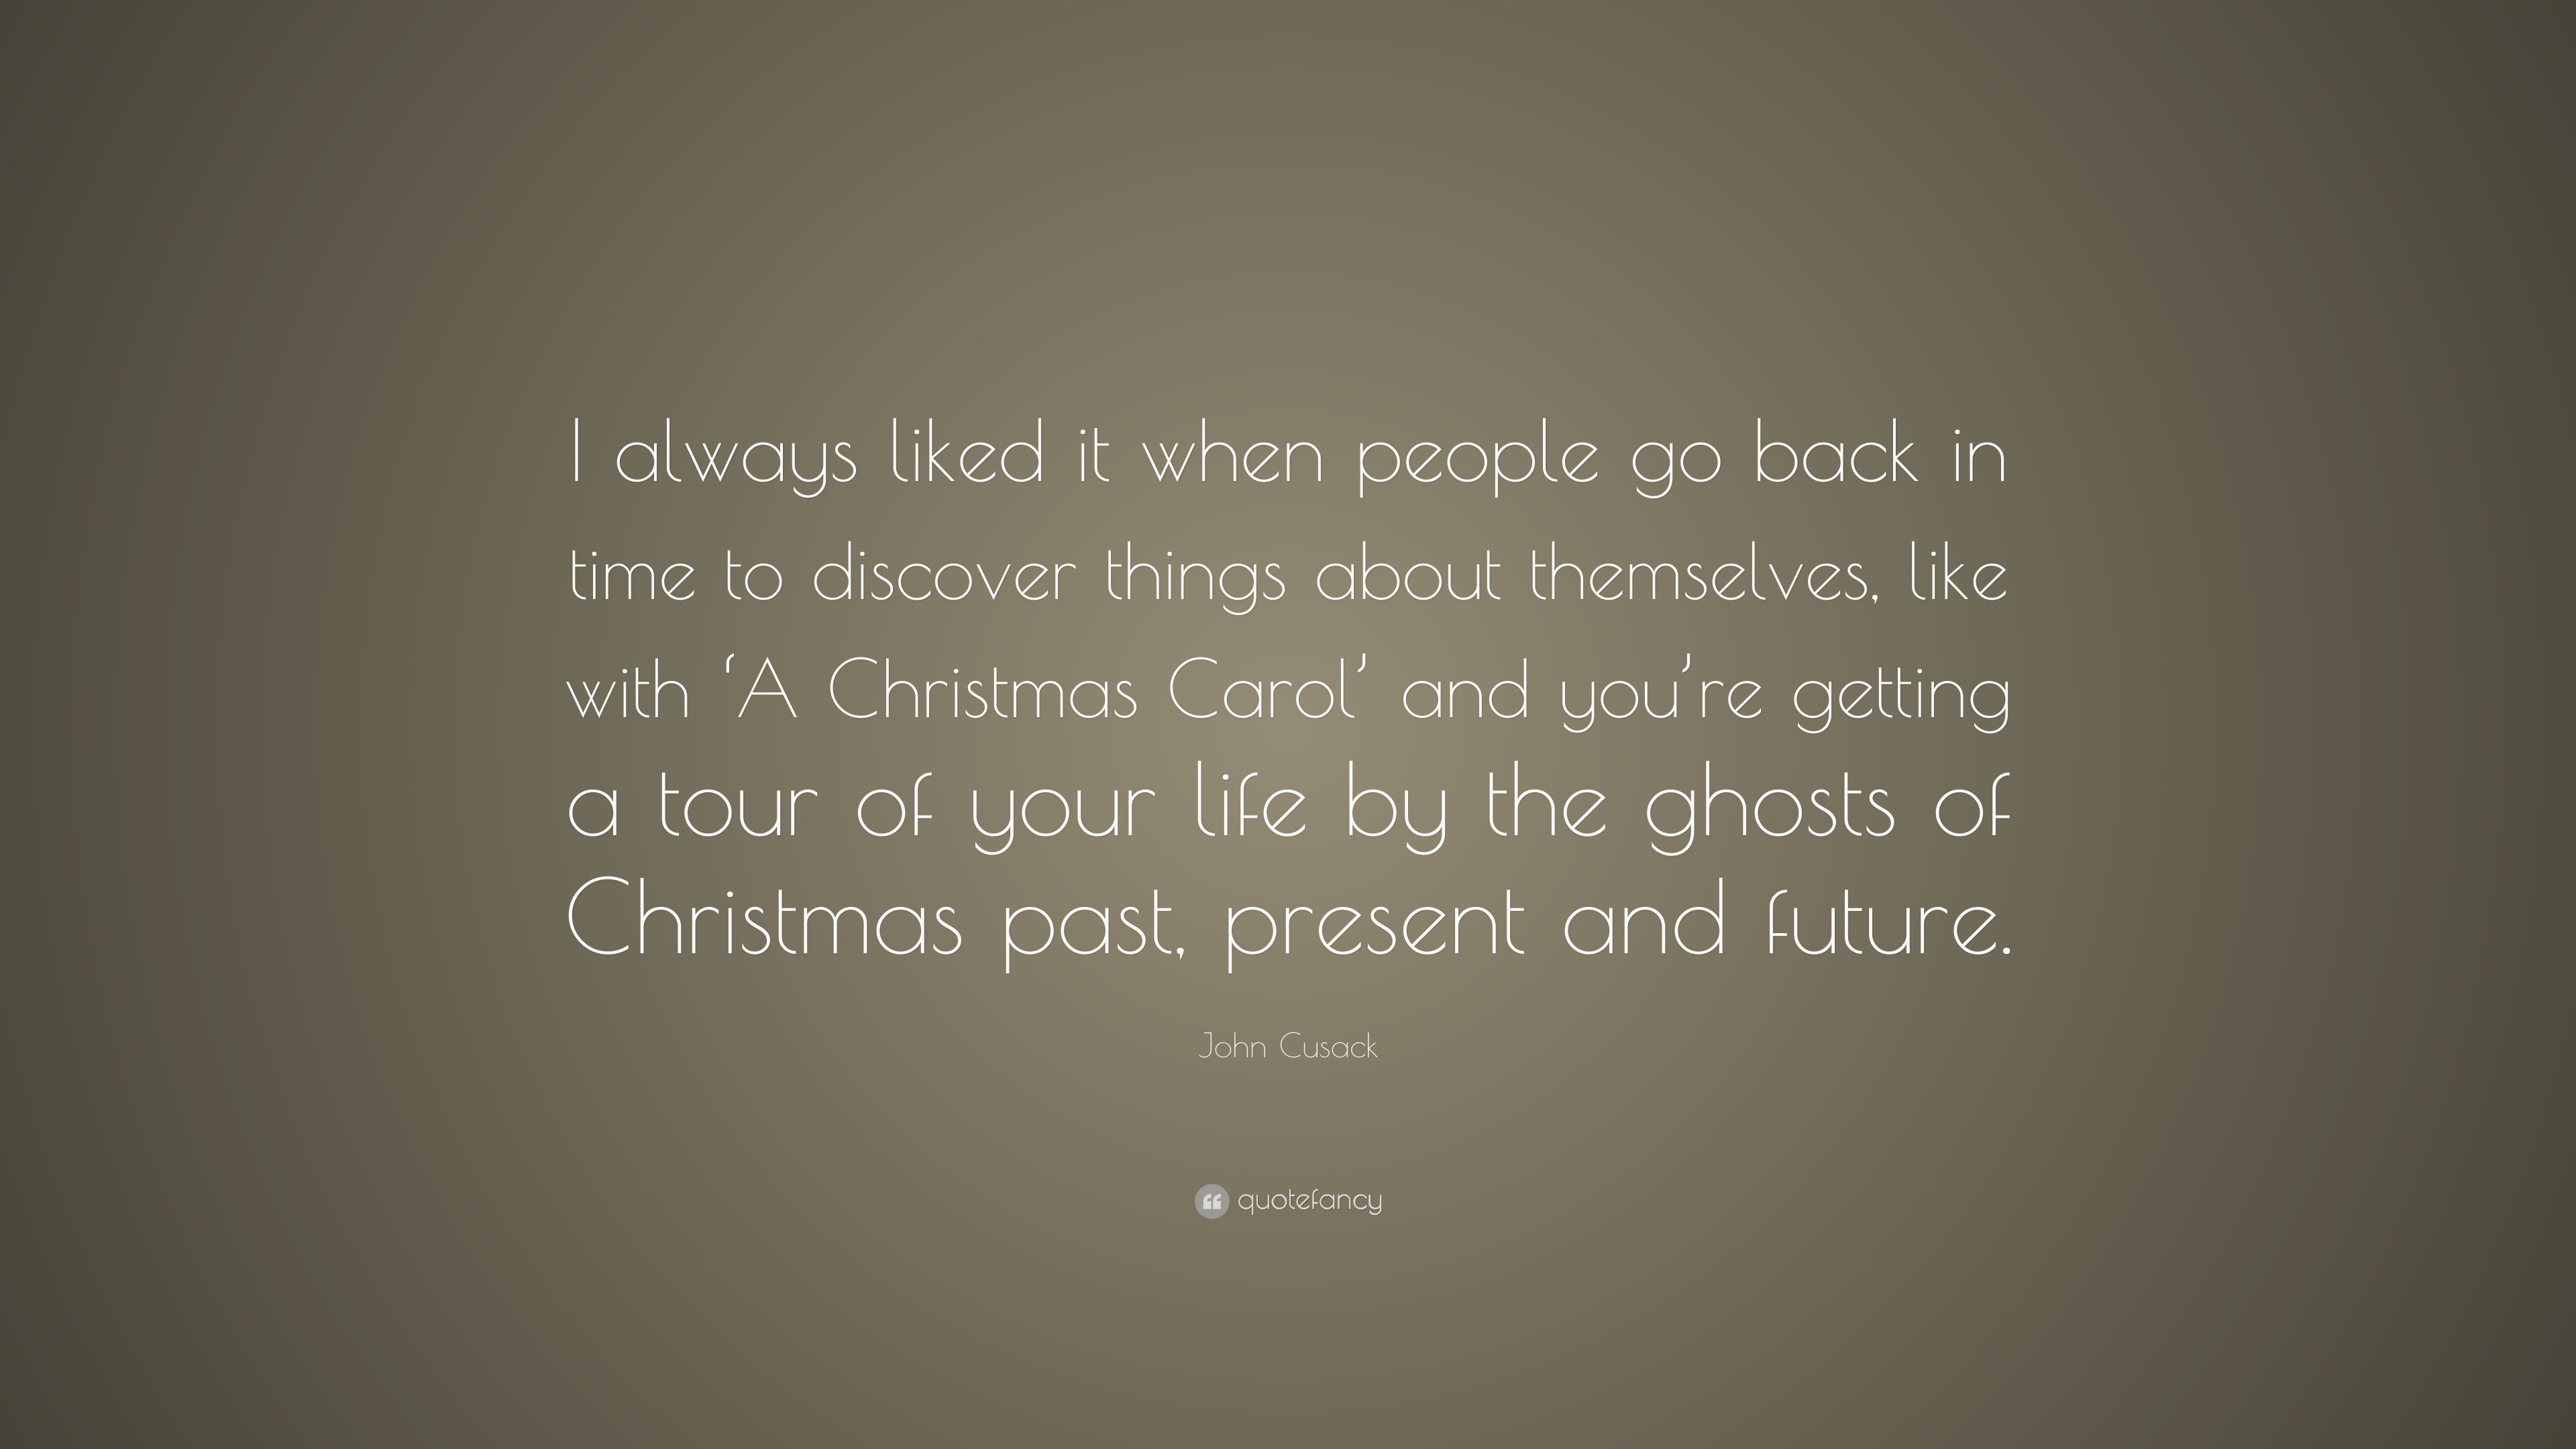 John Cusack Quote: “I always liked it when people go back in time to ...